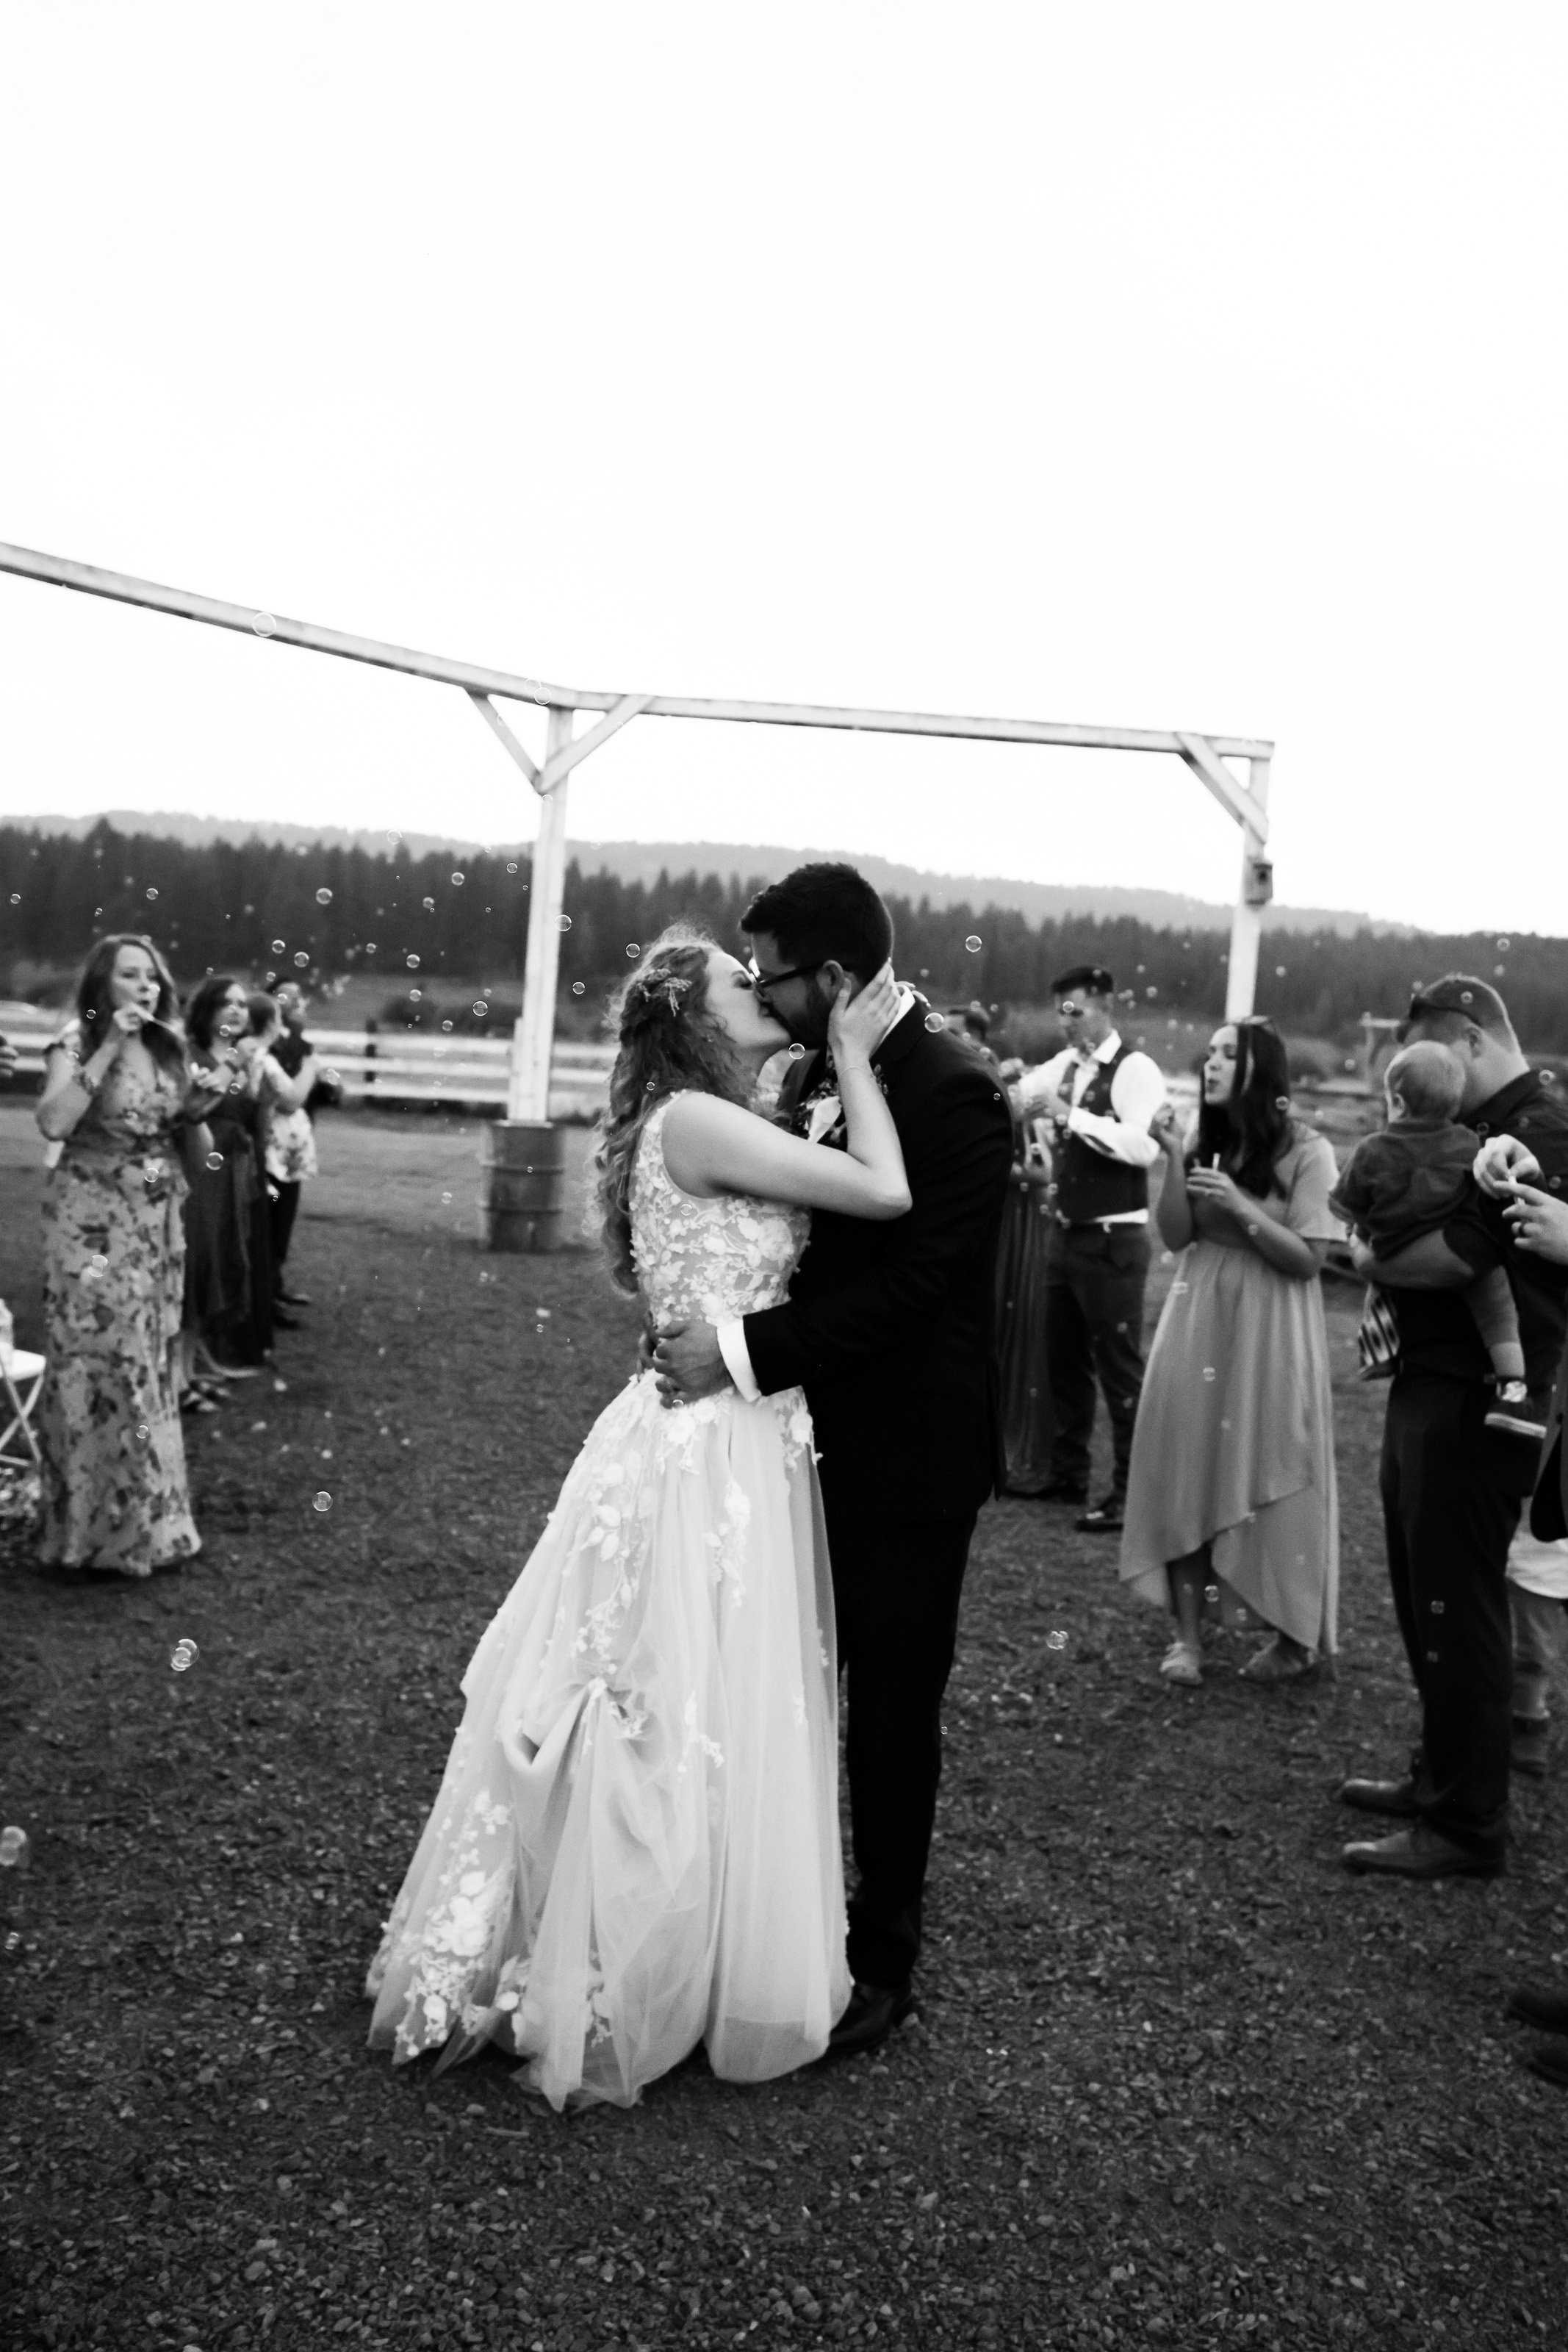 Bride and Groom with Bubbles